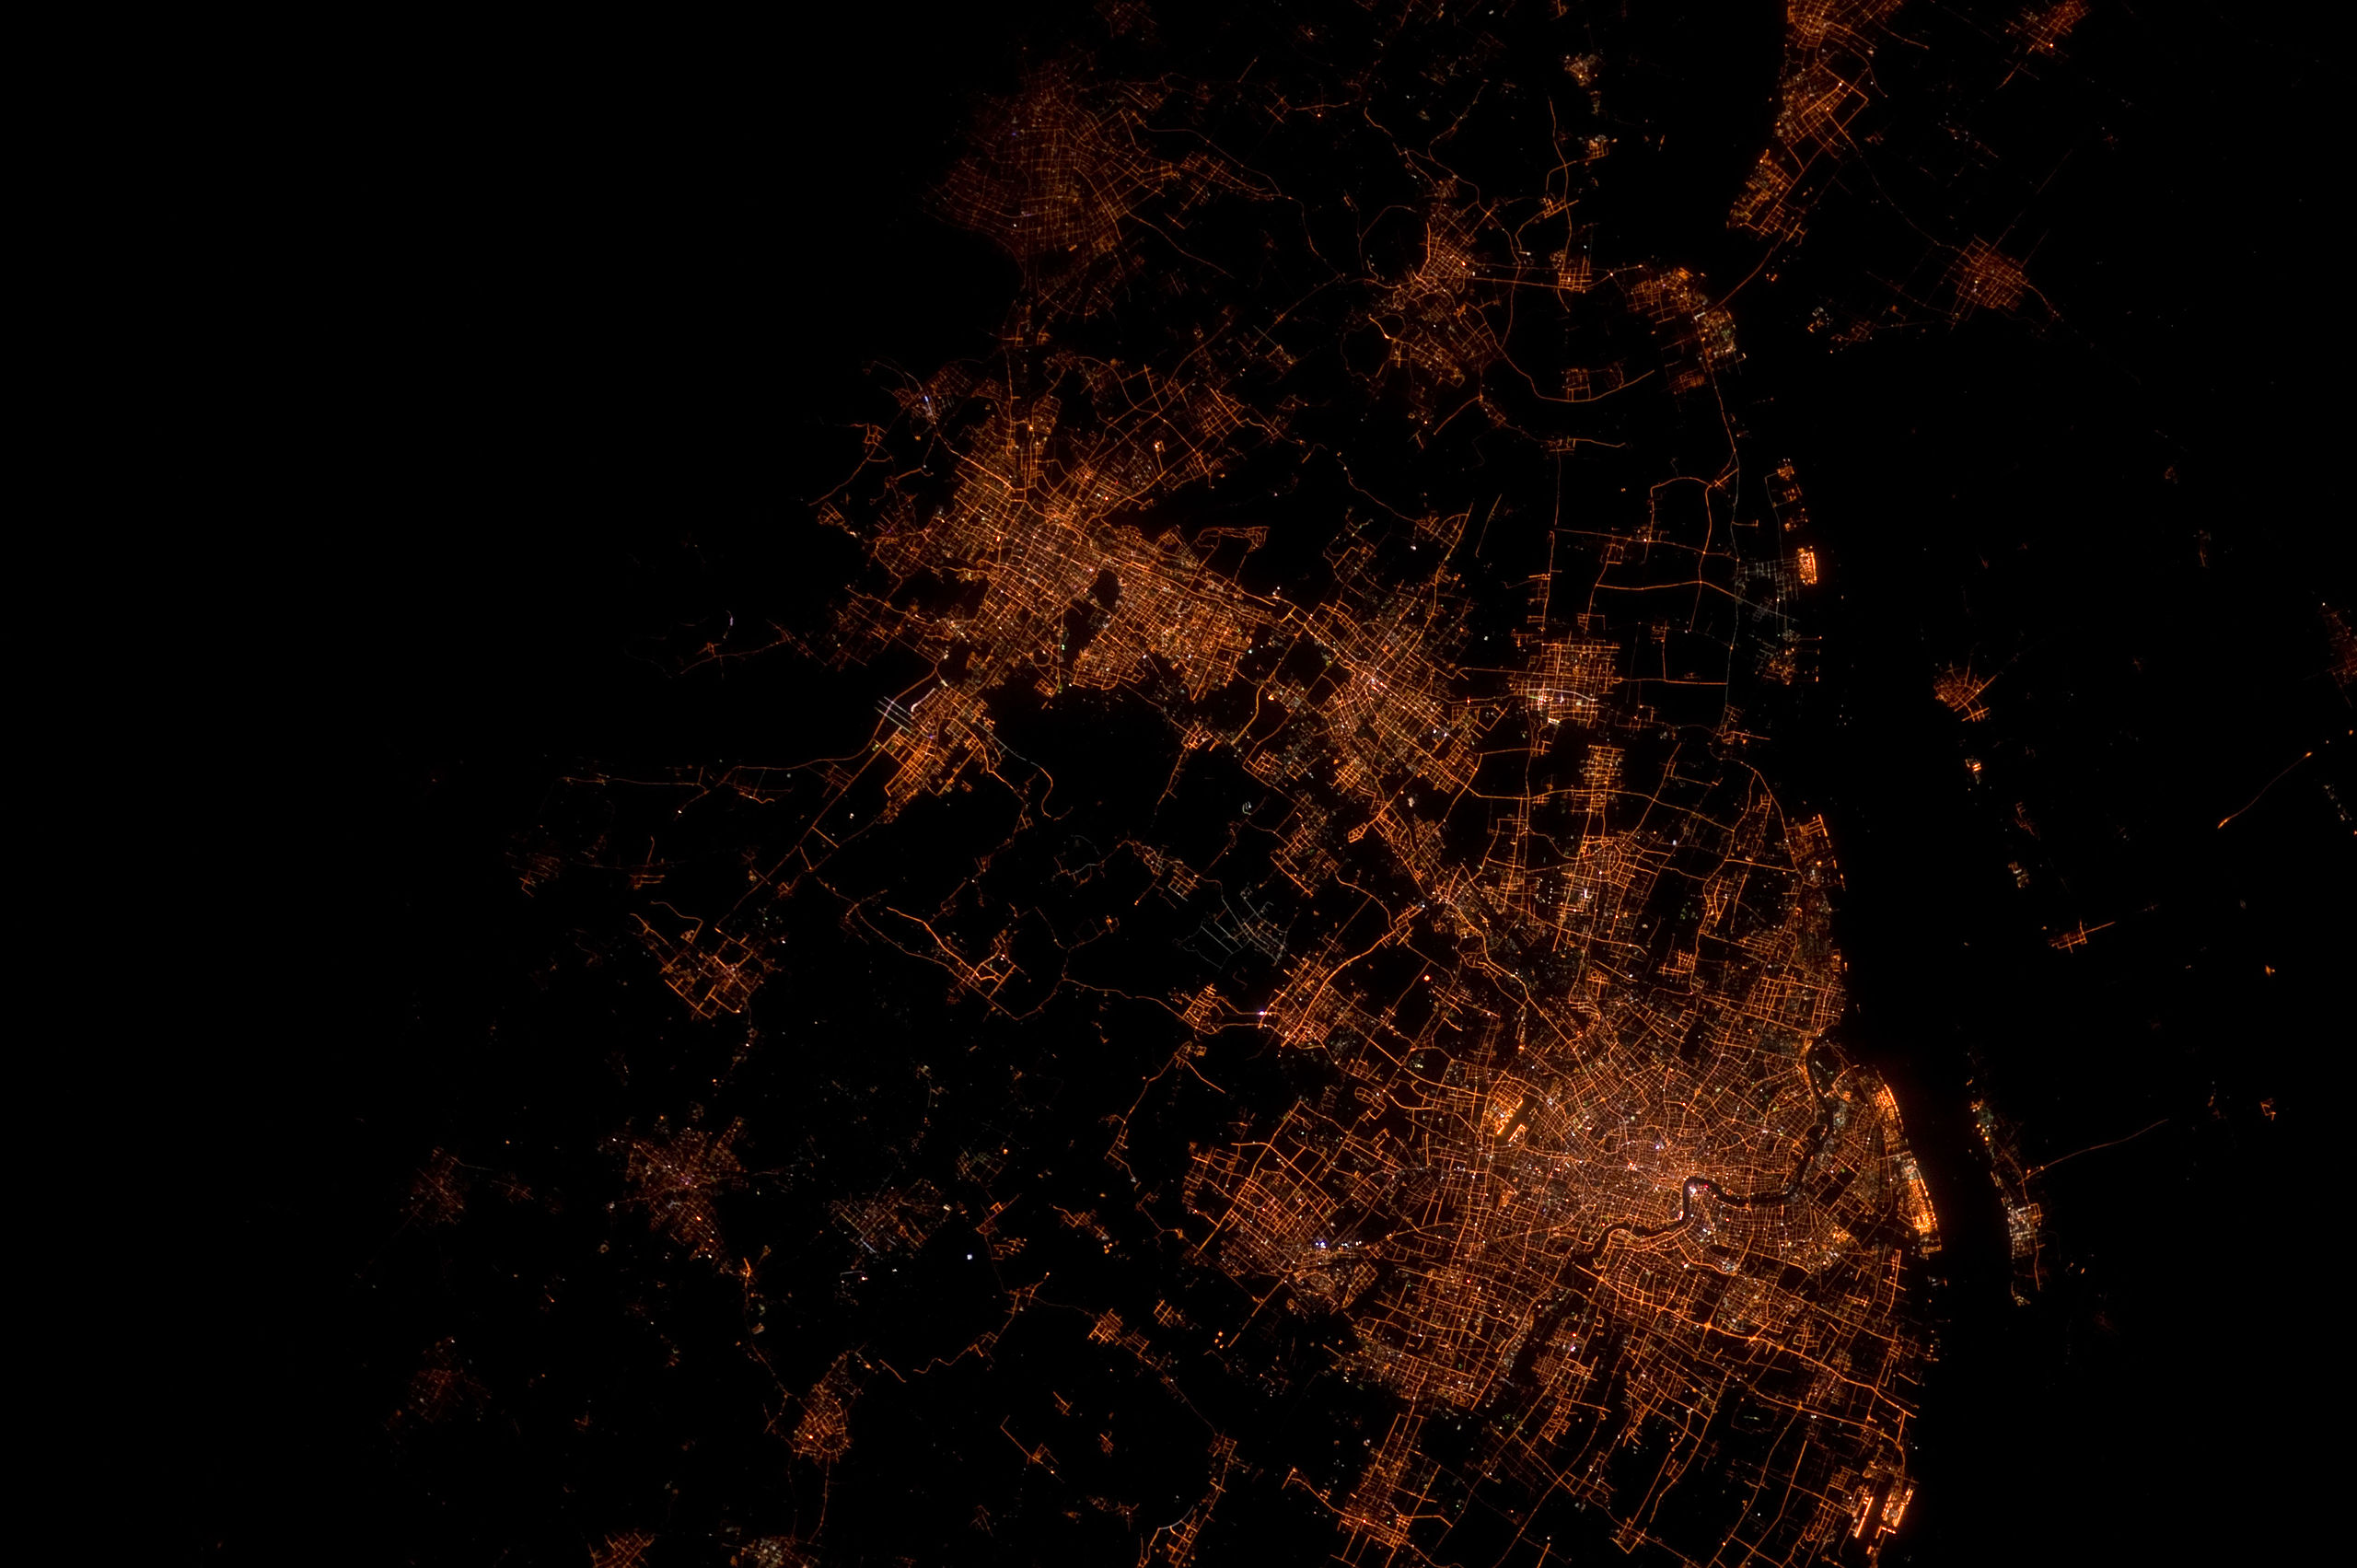 China - Shanghai by night seen from space